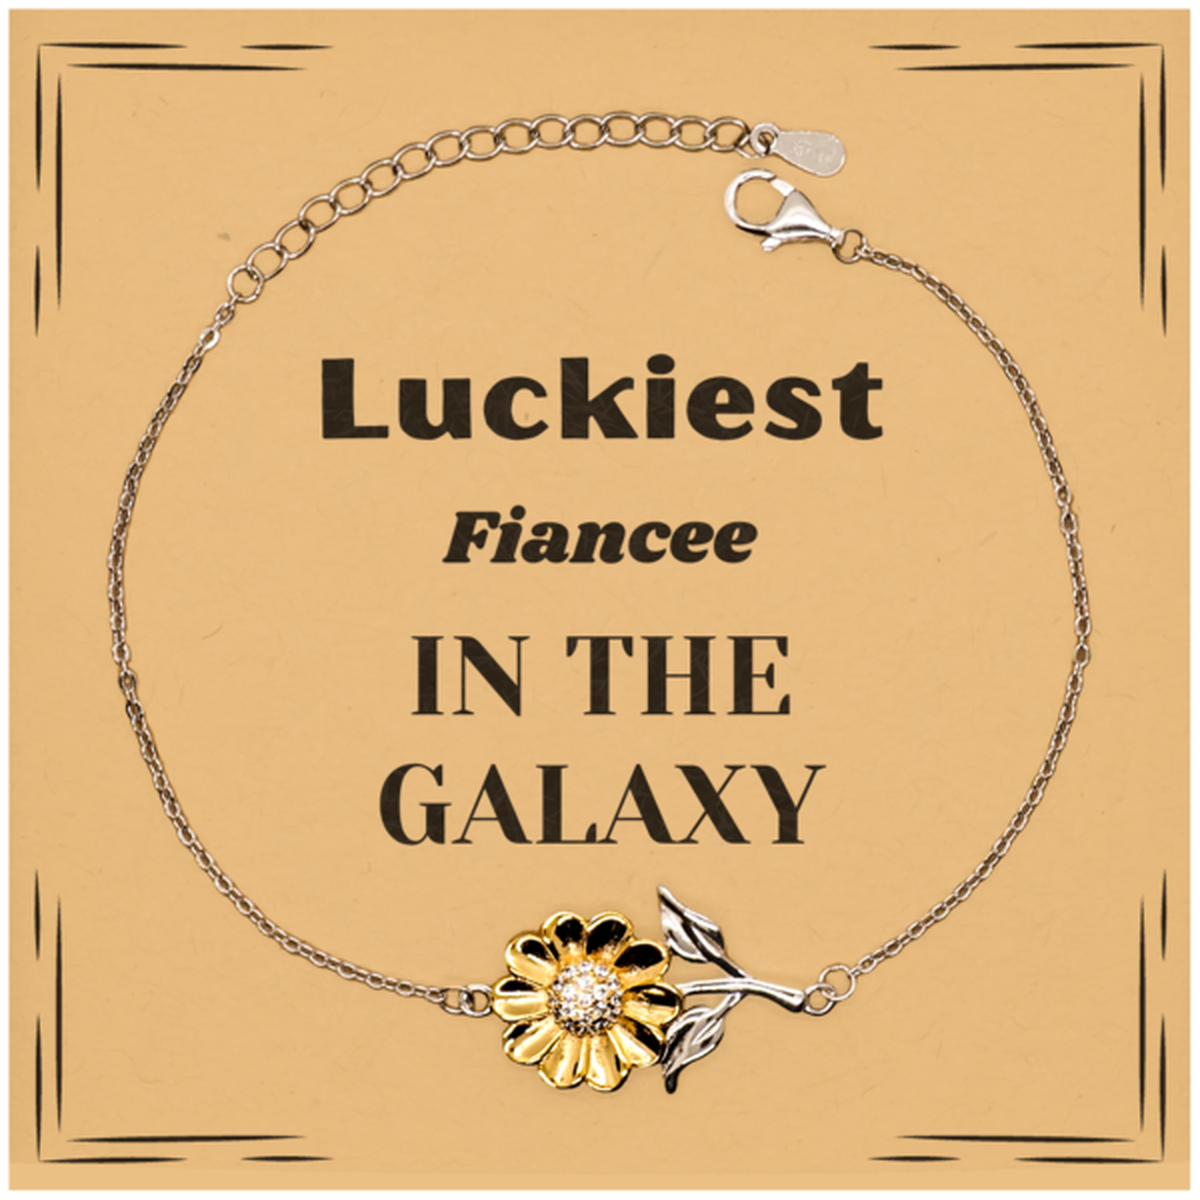 Luckiest Fiancee in the Galaxy, To My Fiancee Message Card Gifts, Christmas Fiancee Sunflower Bracelet Gifts, X-mas Birthday Unique Gifts For Fiancee Men Women